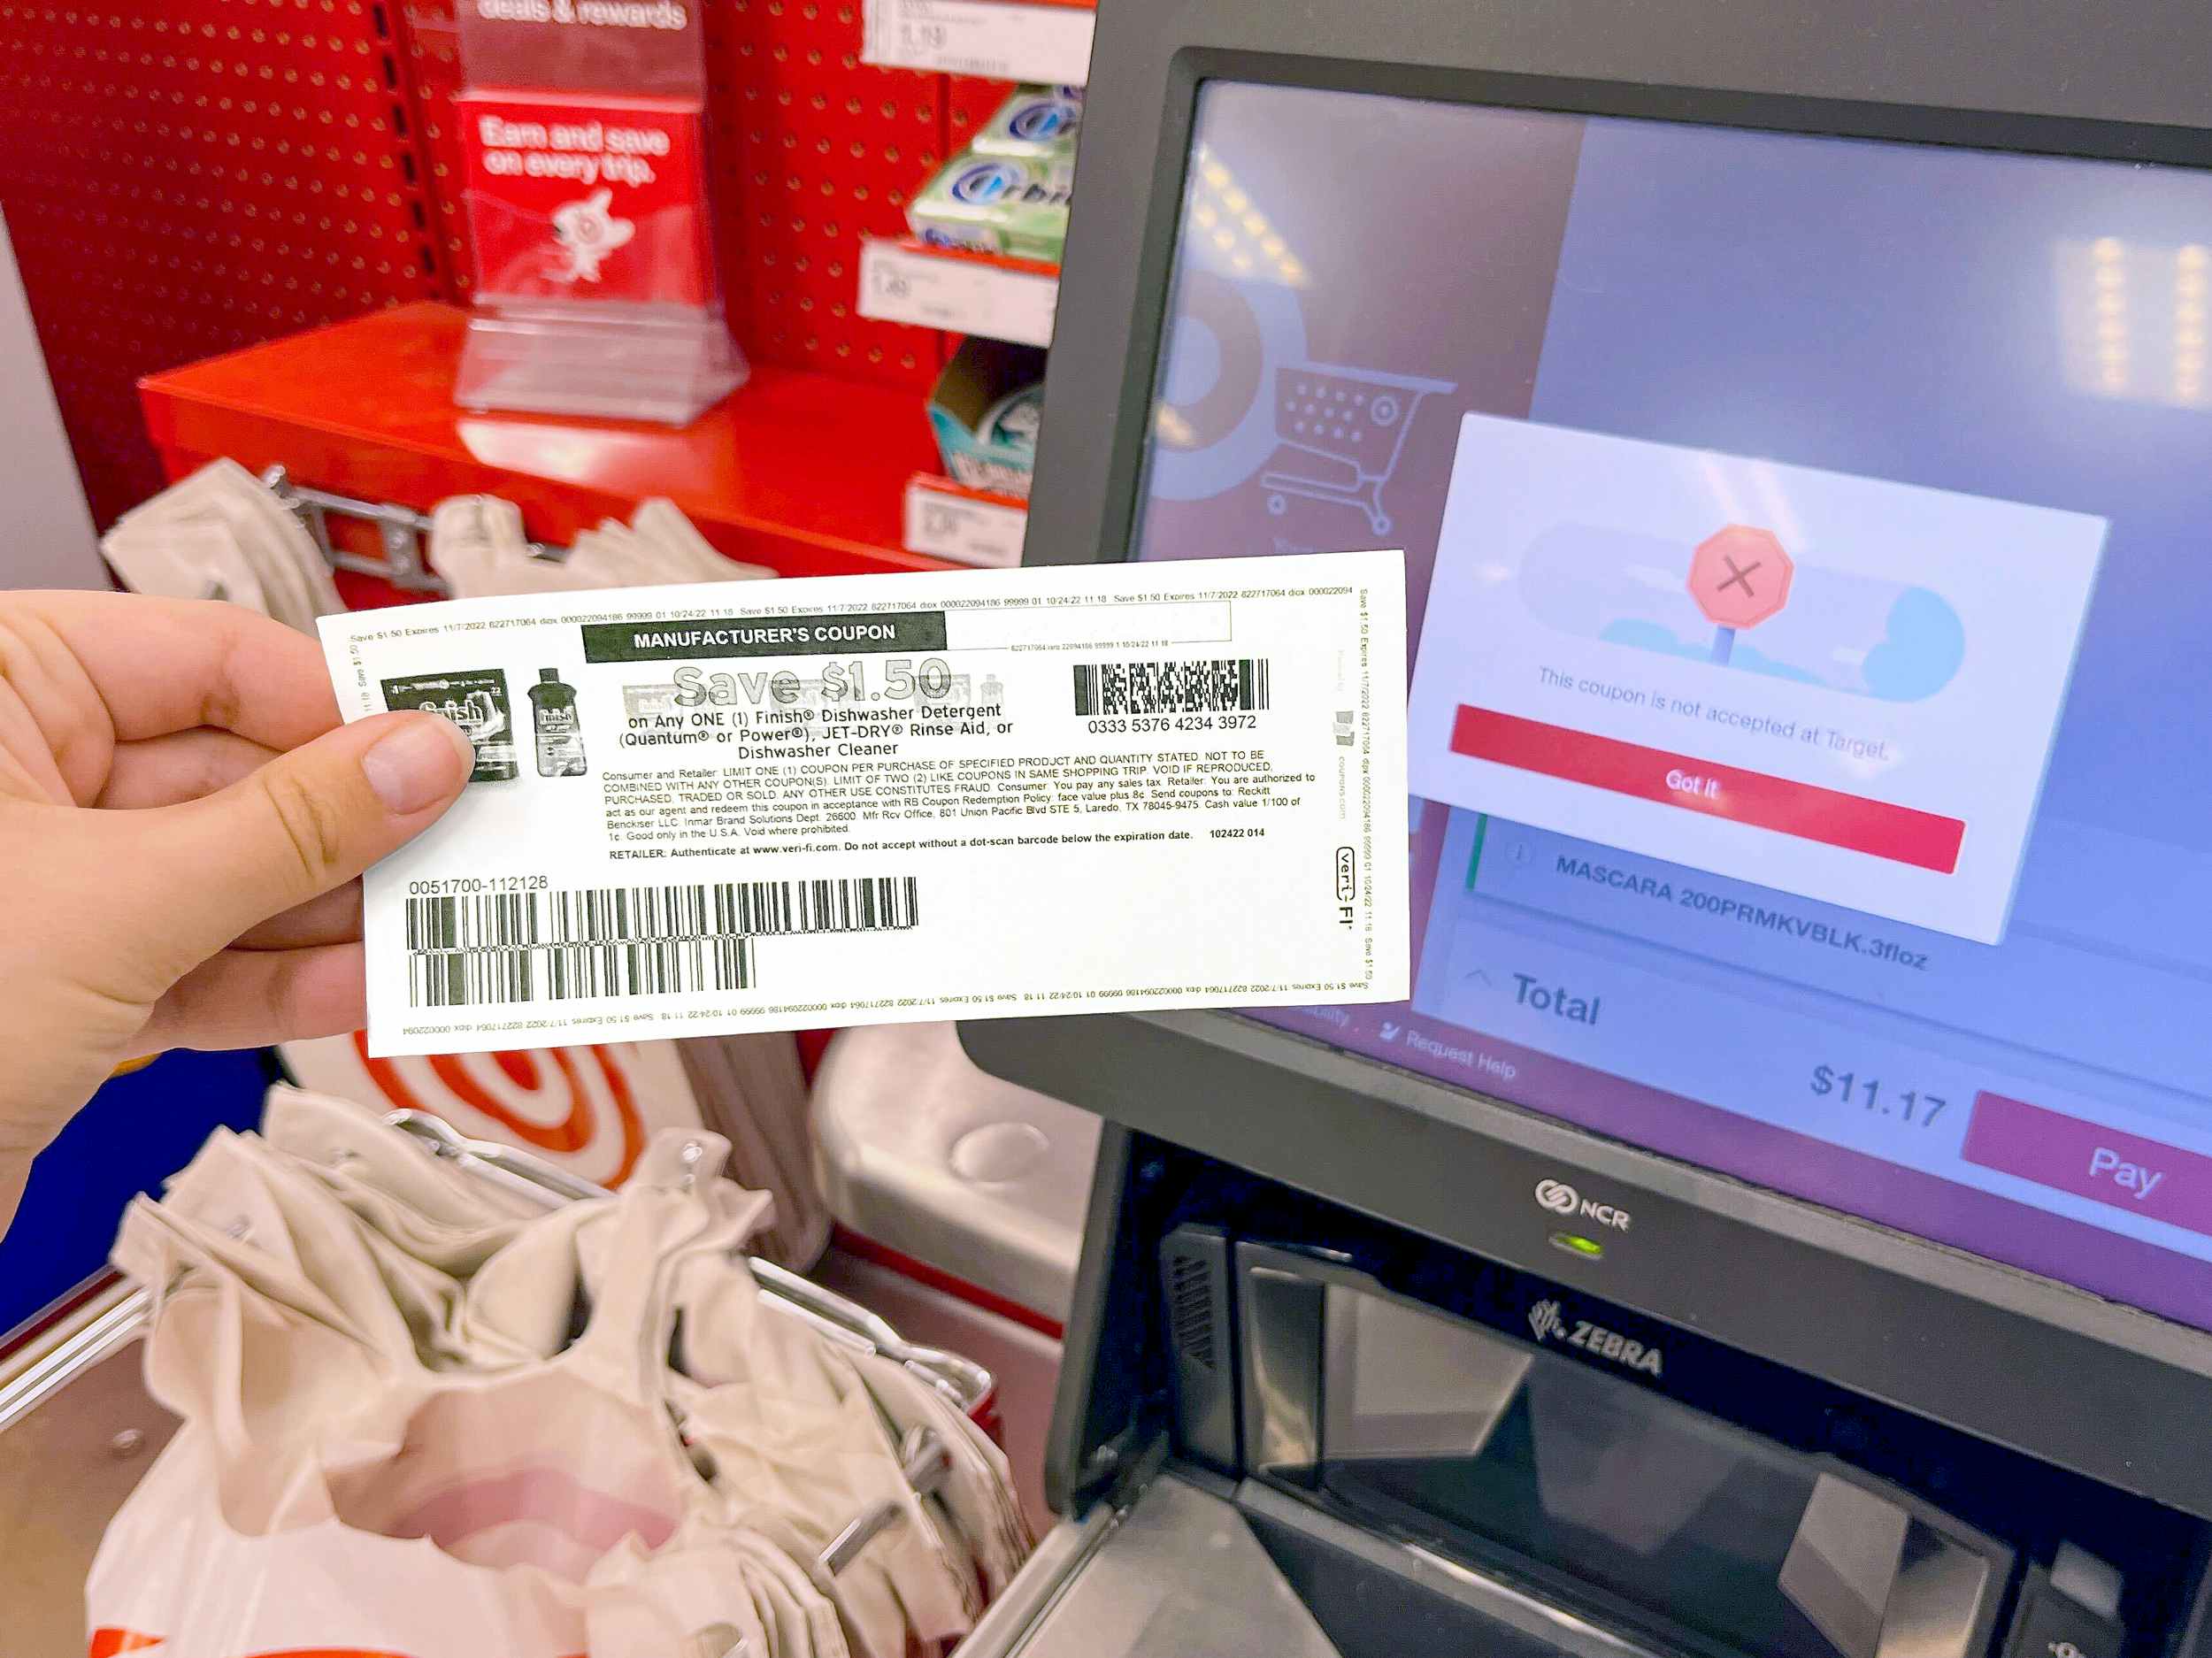 person holding up a rejected manufacturers coupon next to a target checkout screen